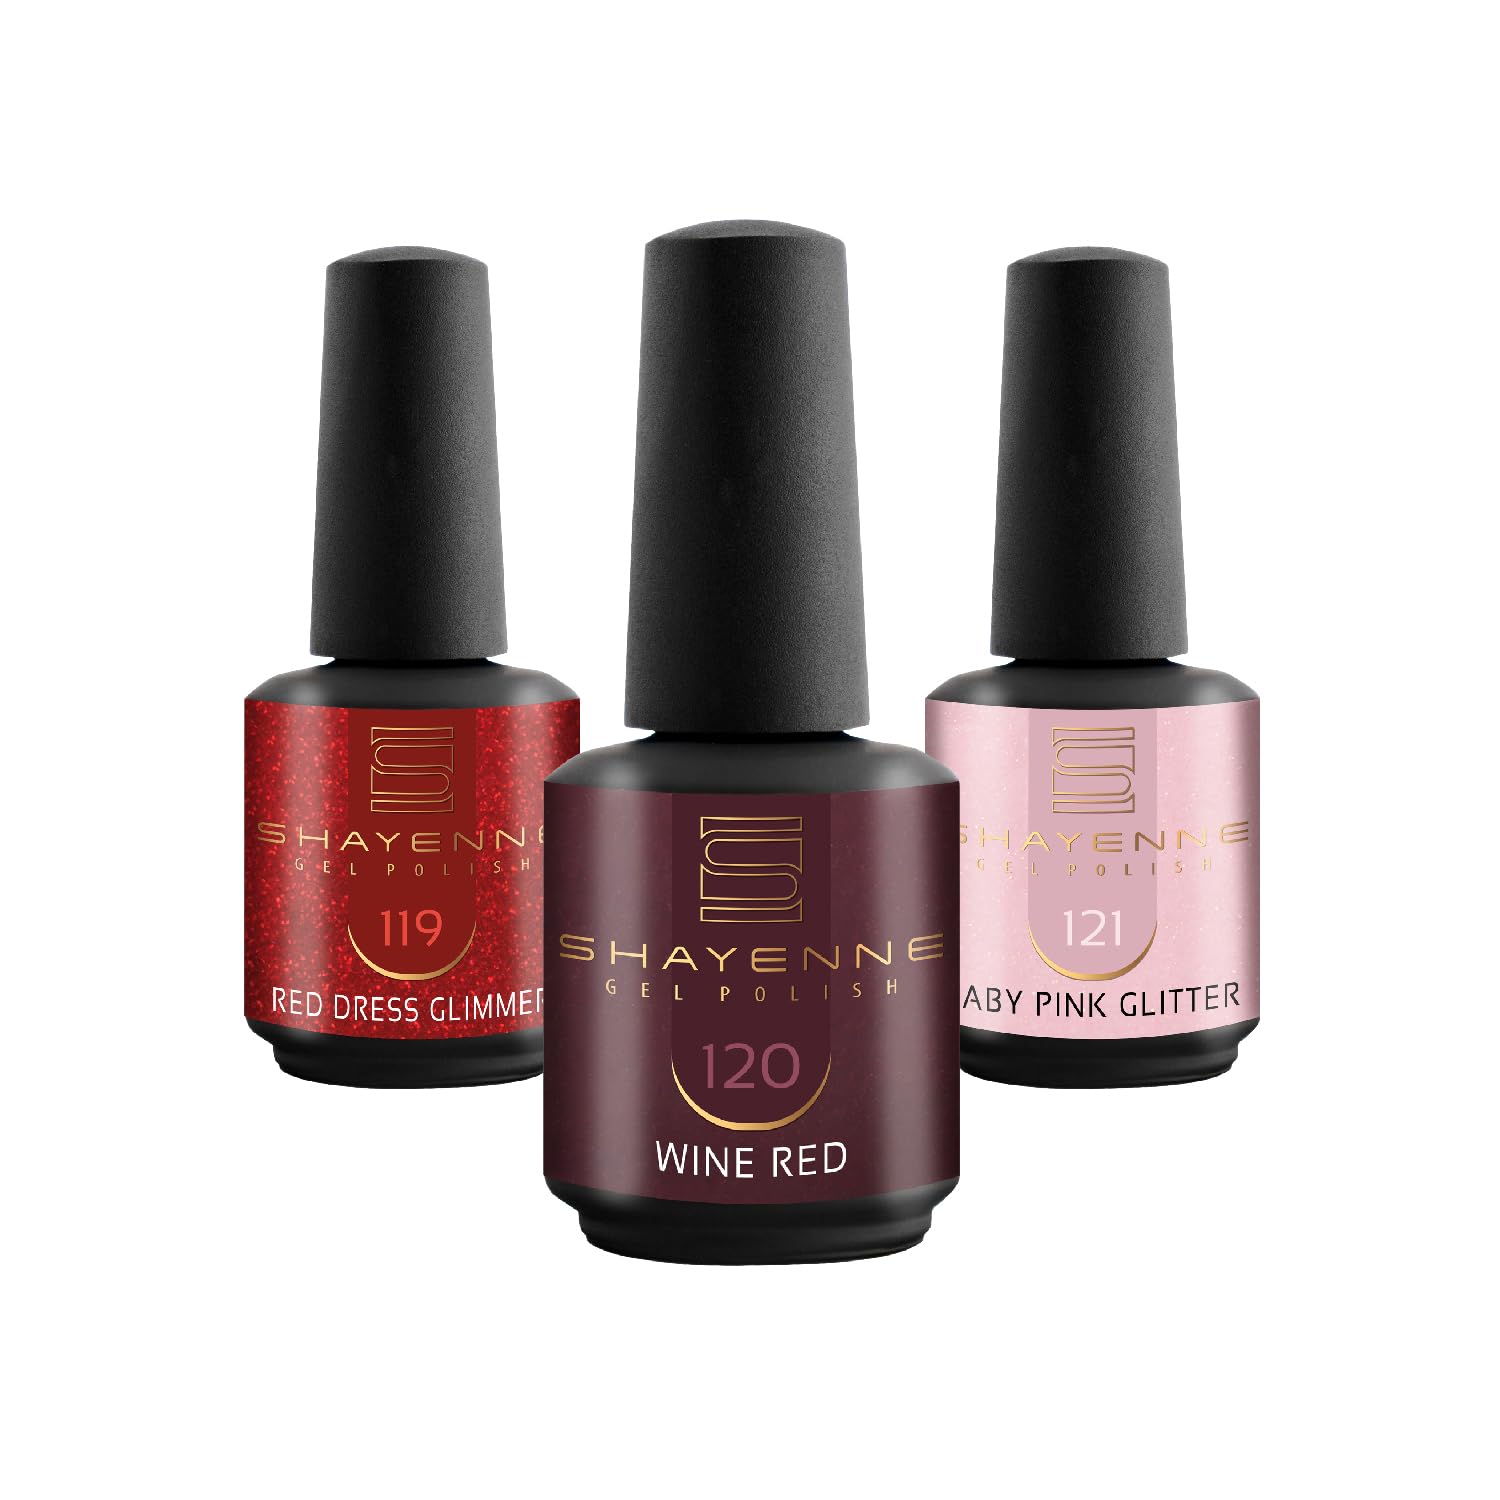 Shayenne uv nail polish set - made in germany 3 pieces - 119 red dress mica 15 ml - 120 Wine Red 15 ml - 121 baby pink glitter 15 ml gel color polish gel polish nail polish nail gel